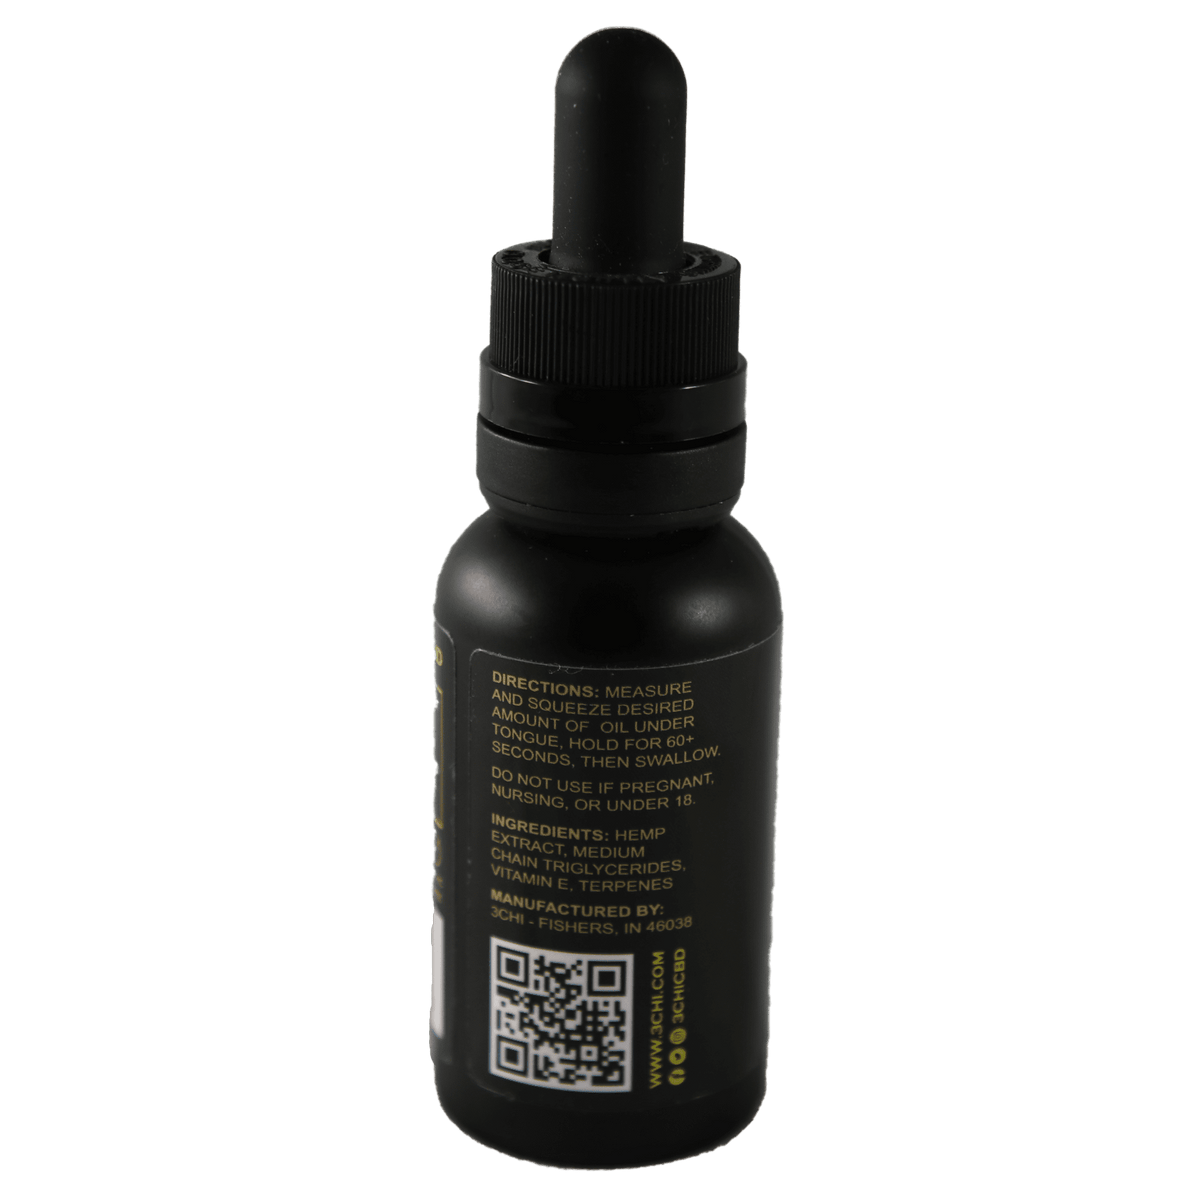 3 Chi Soothe CBD Oil